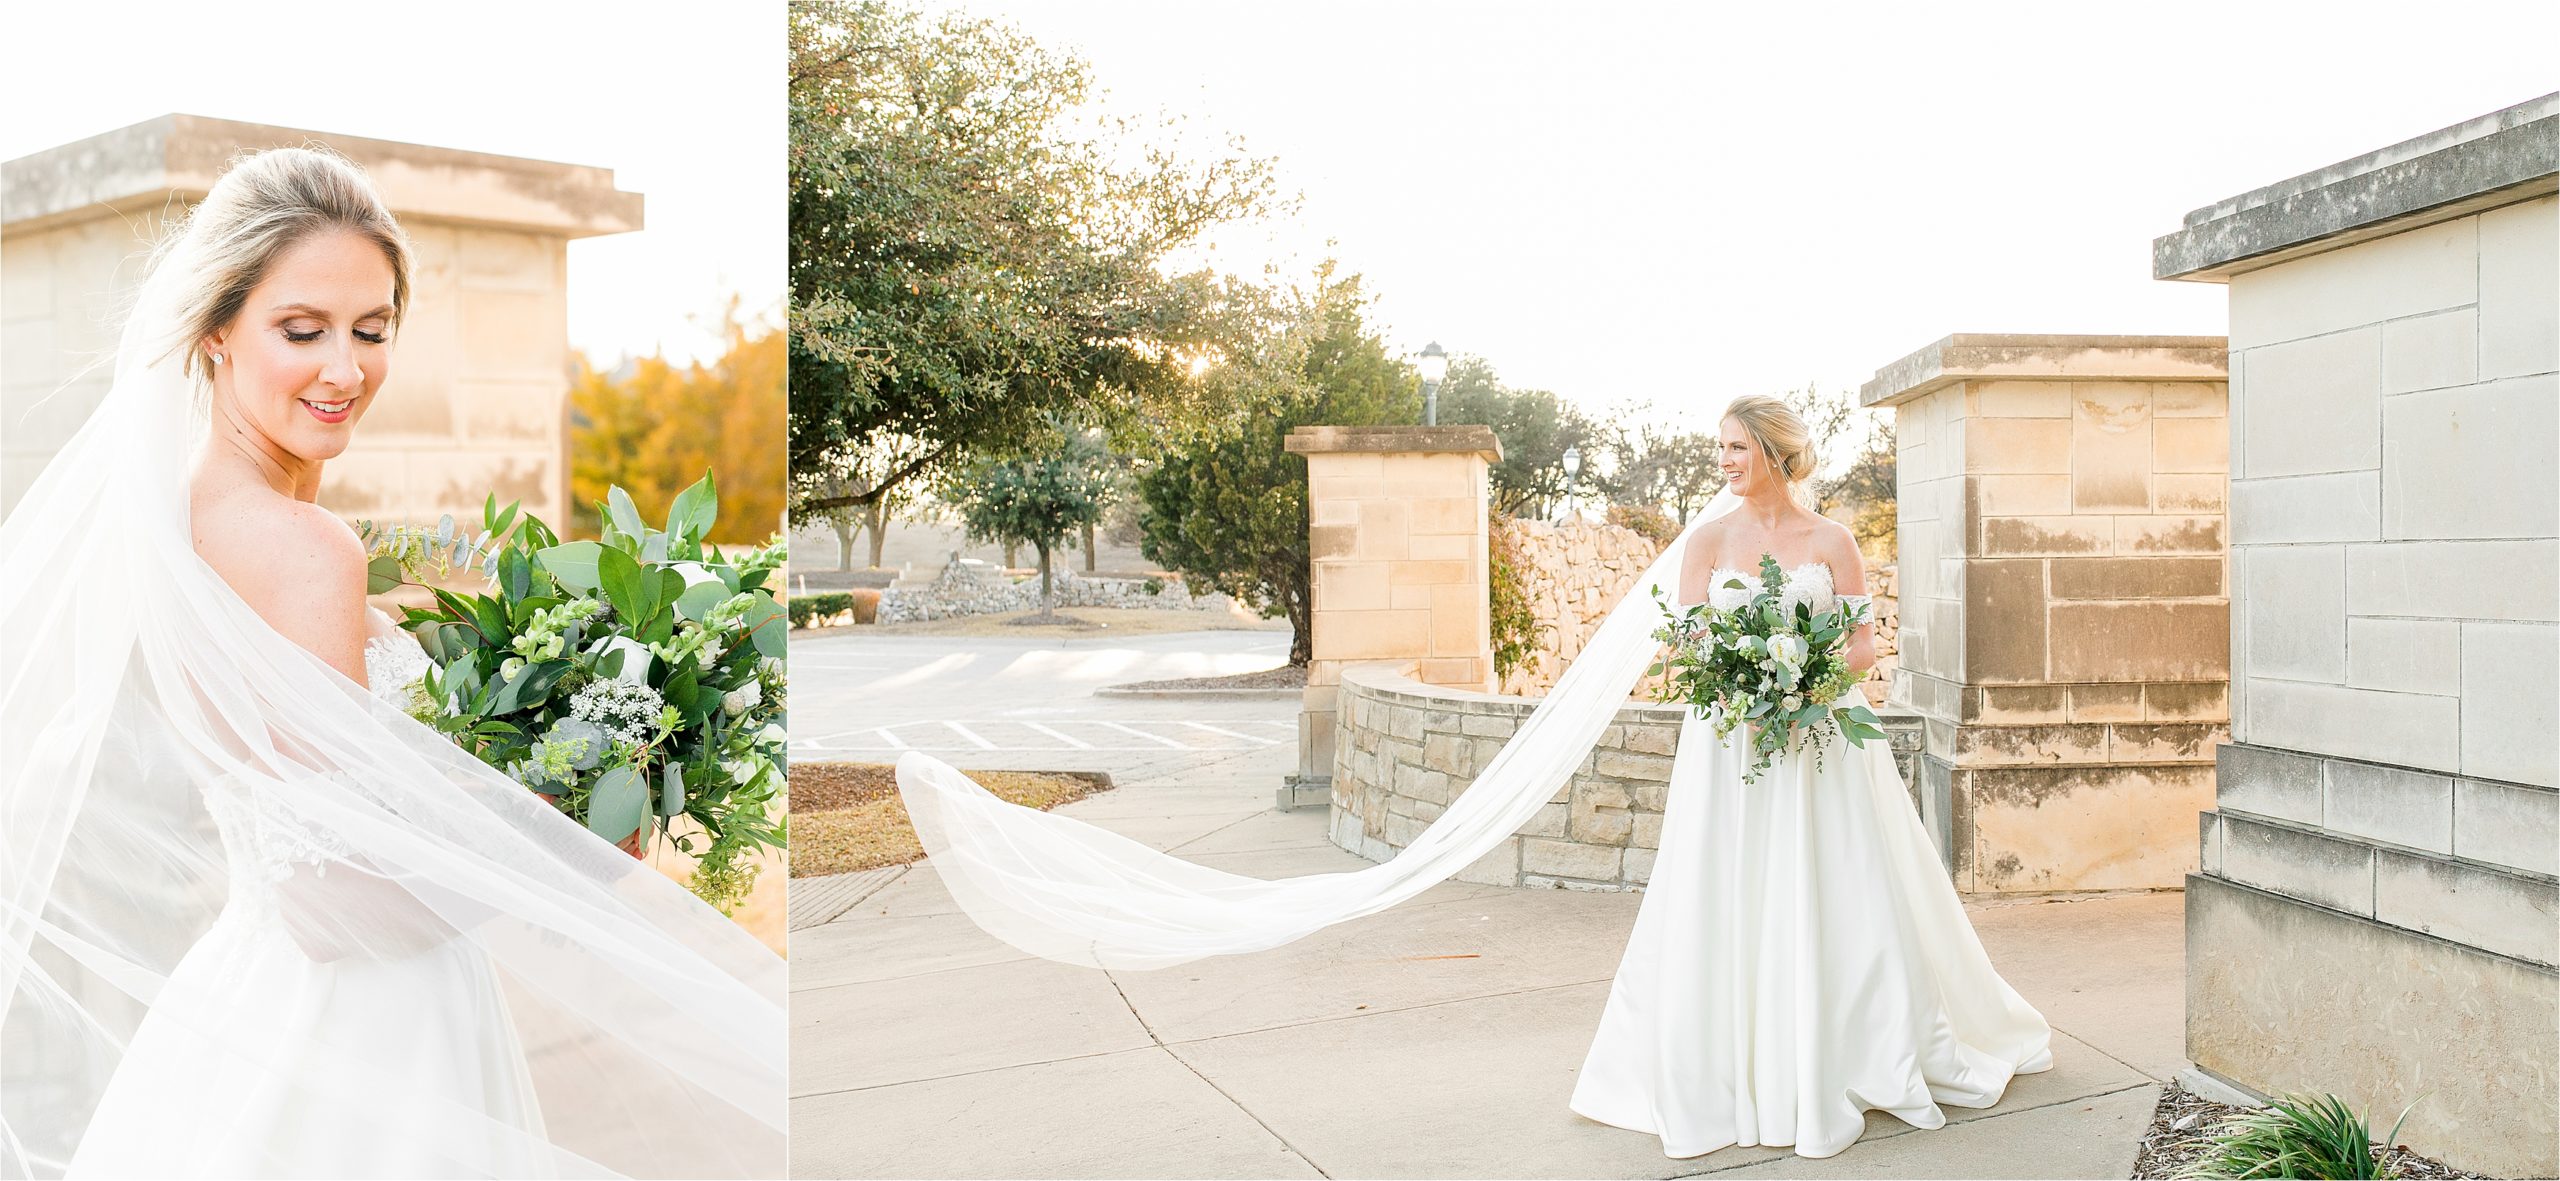 A bride in an off the shoulder lace gown is draped in her veil as it floats in the air in front of a stone ledge at adriatica village with Hill Country Wedding photographer Jillian Hogan 